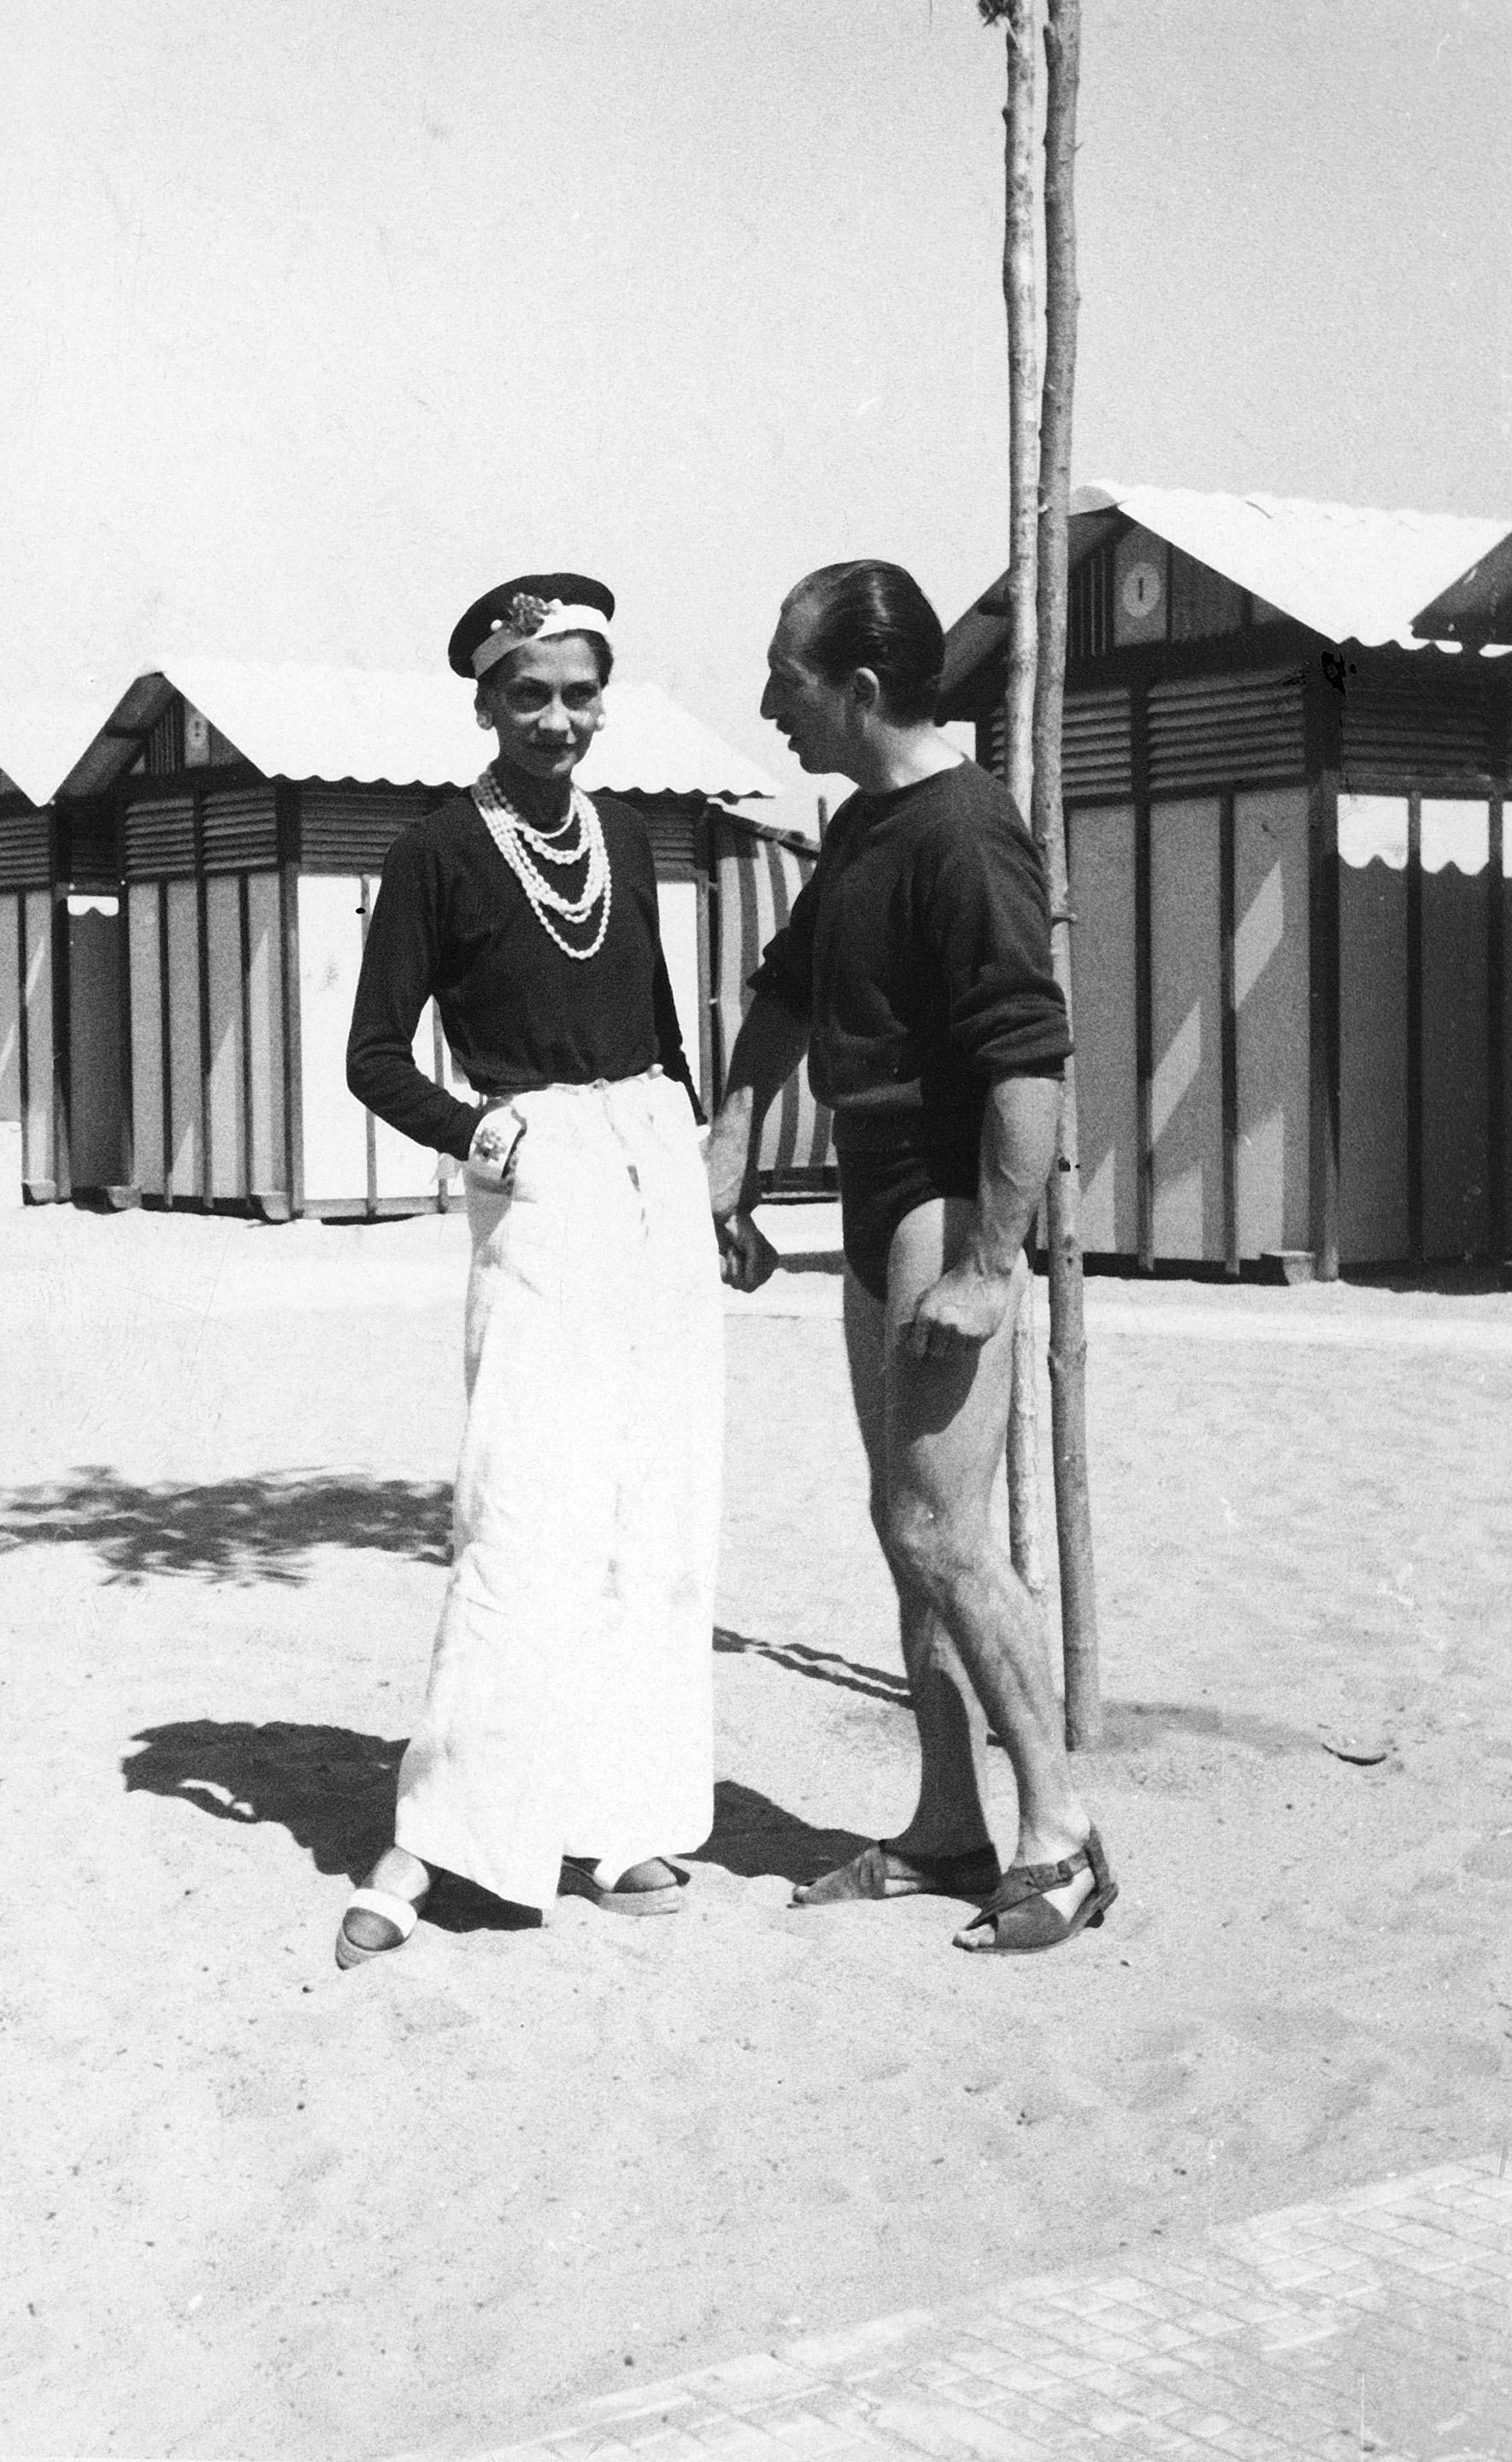 Regnskab Endeløs respektfuld How Coco Chanel changed the course of women's fashion - CNN Style